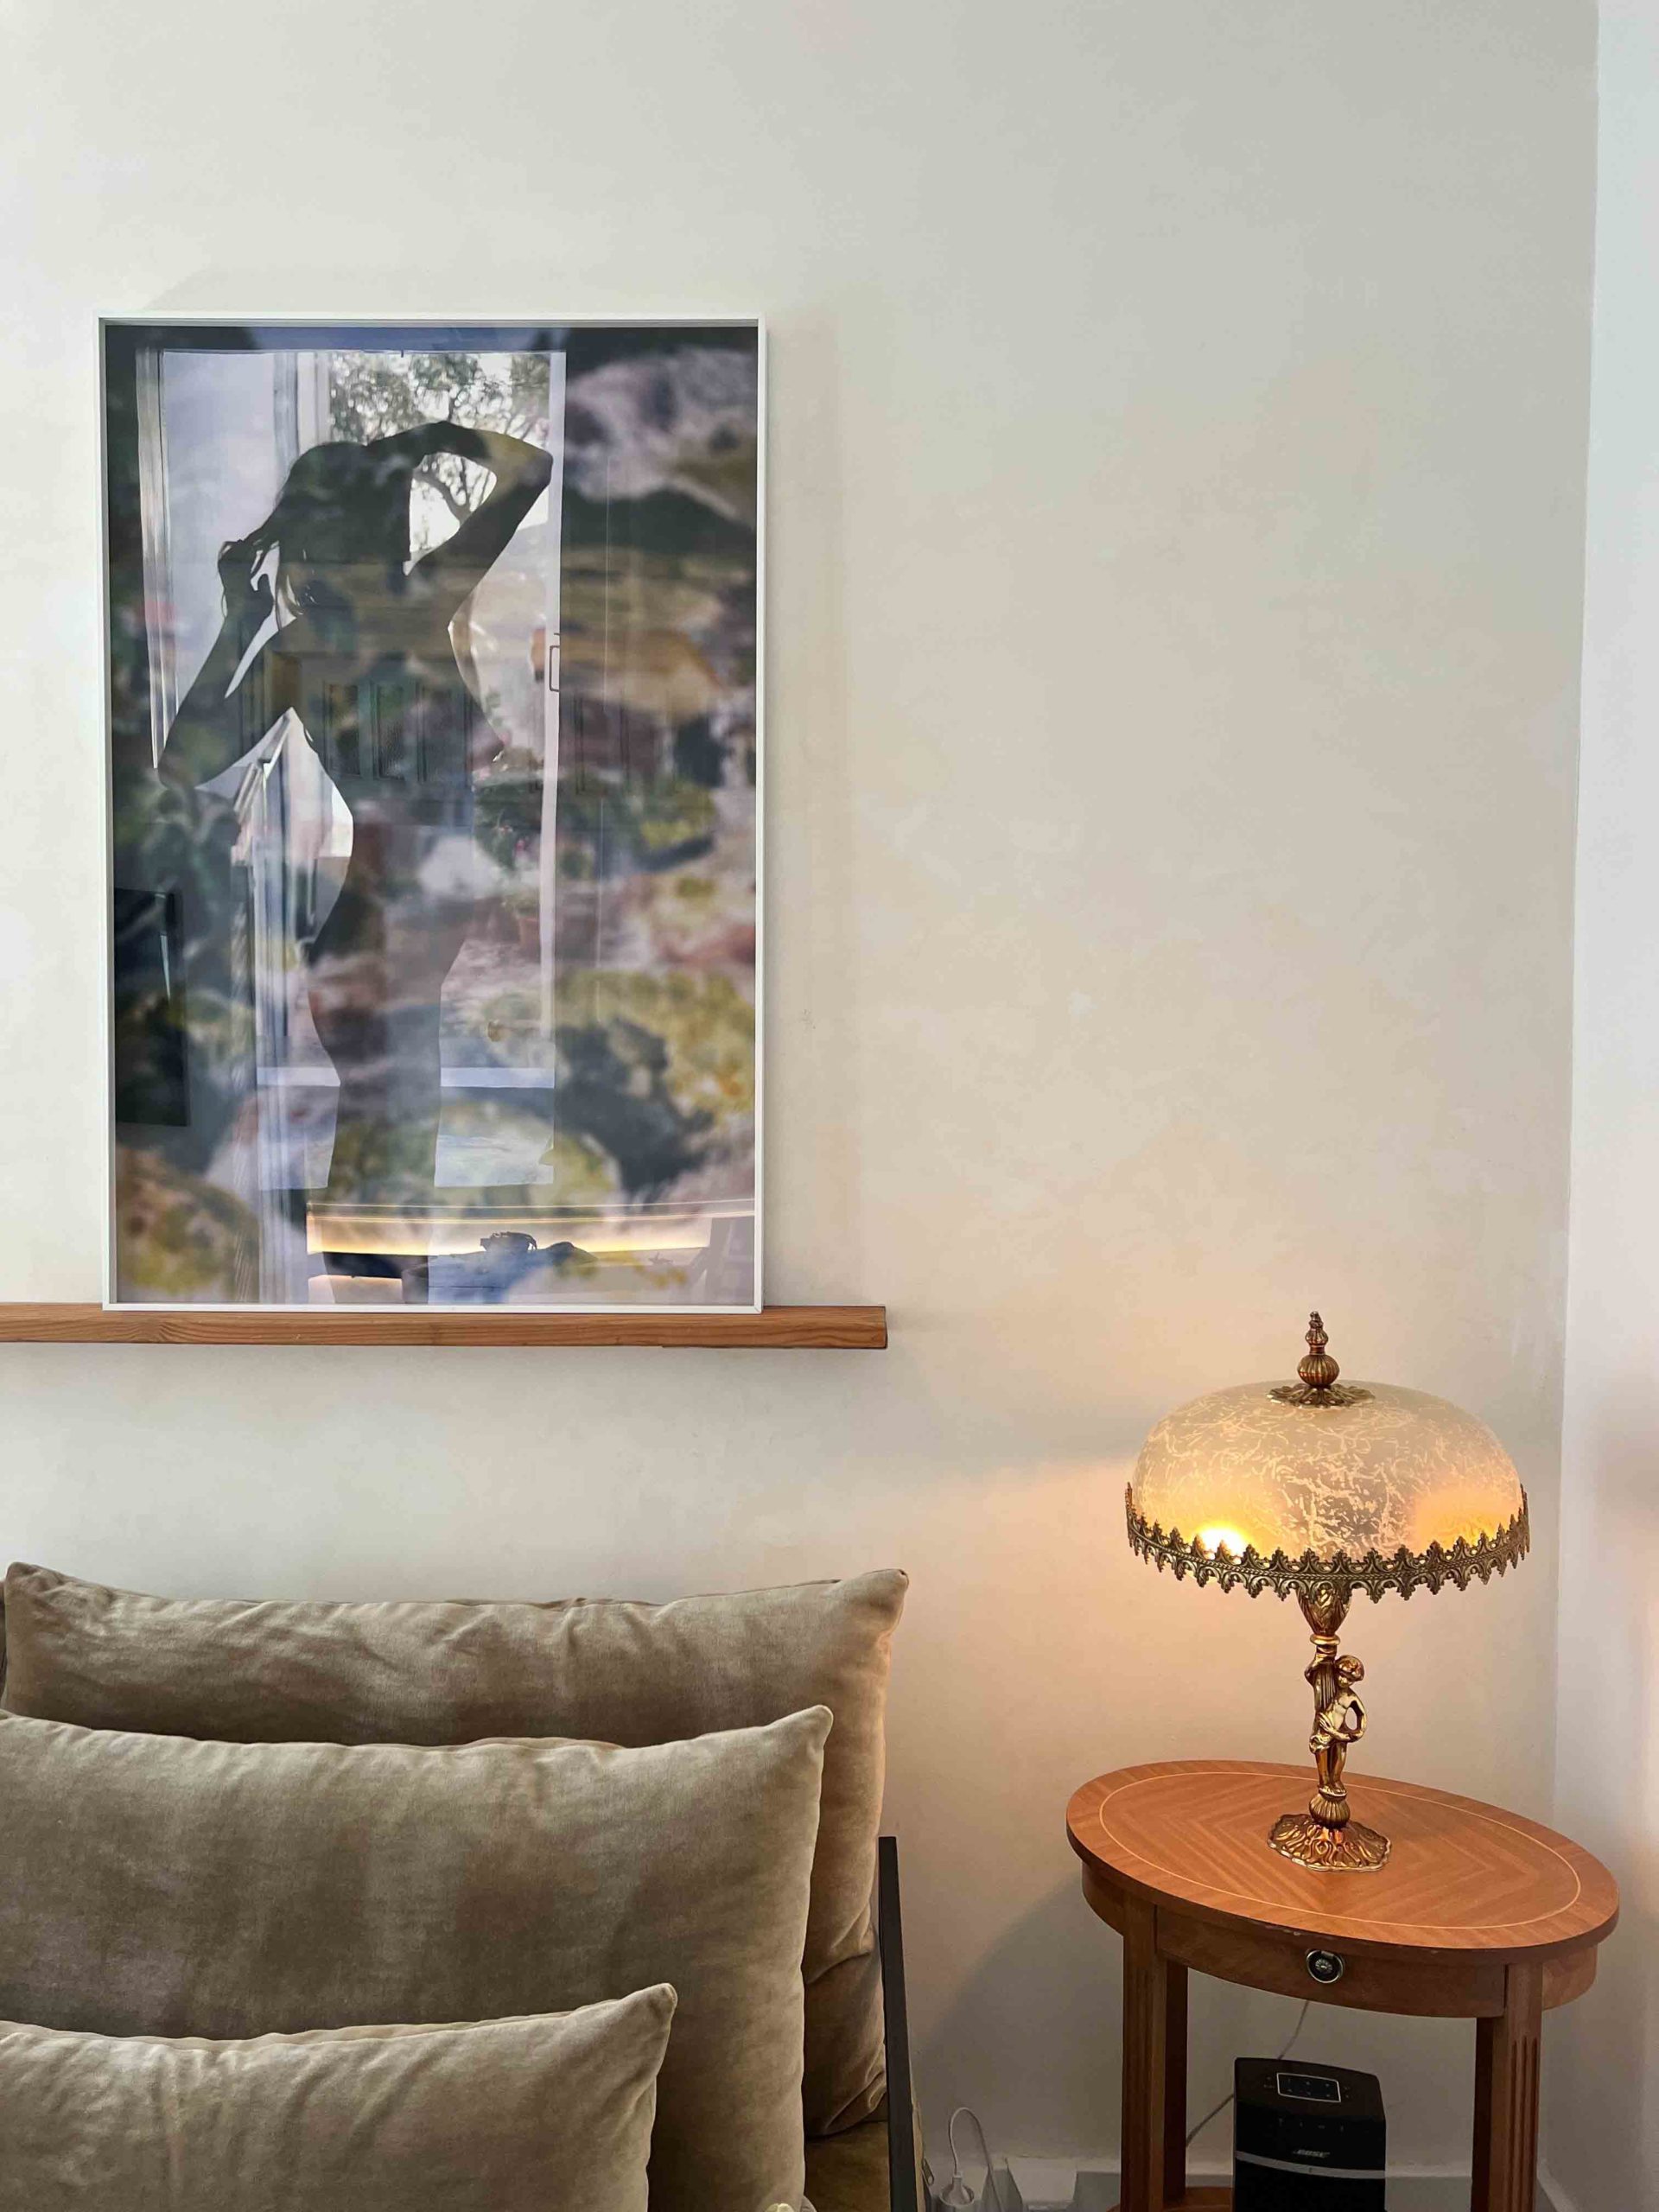 An eclectic mixture of antiques, contemporary art, and modern comforts such as Sonos music